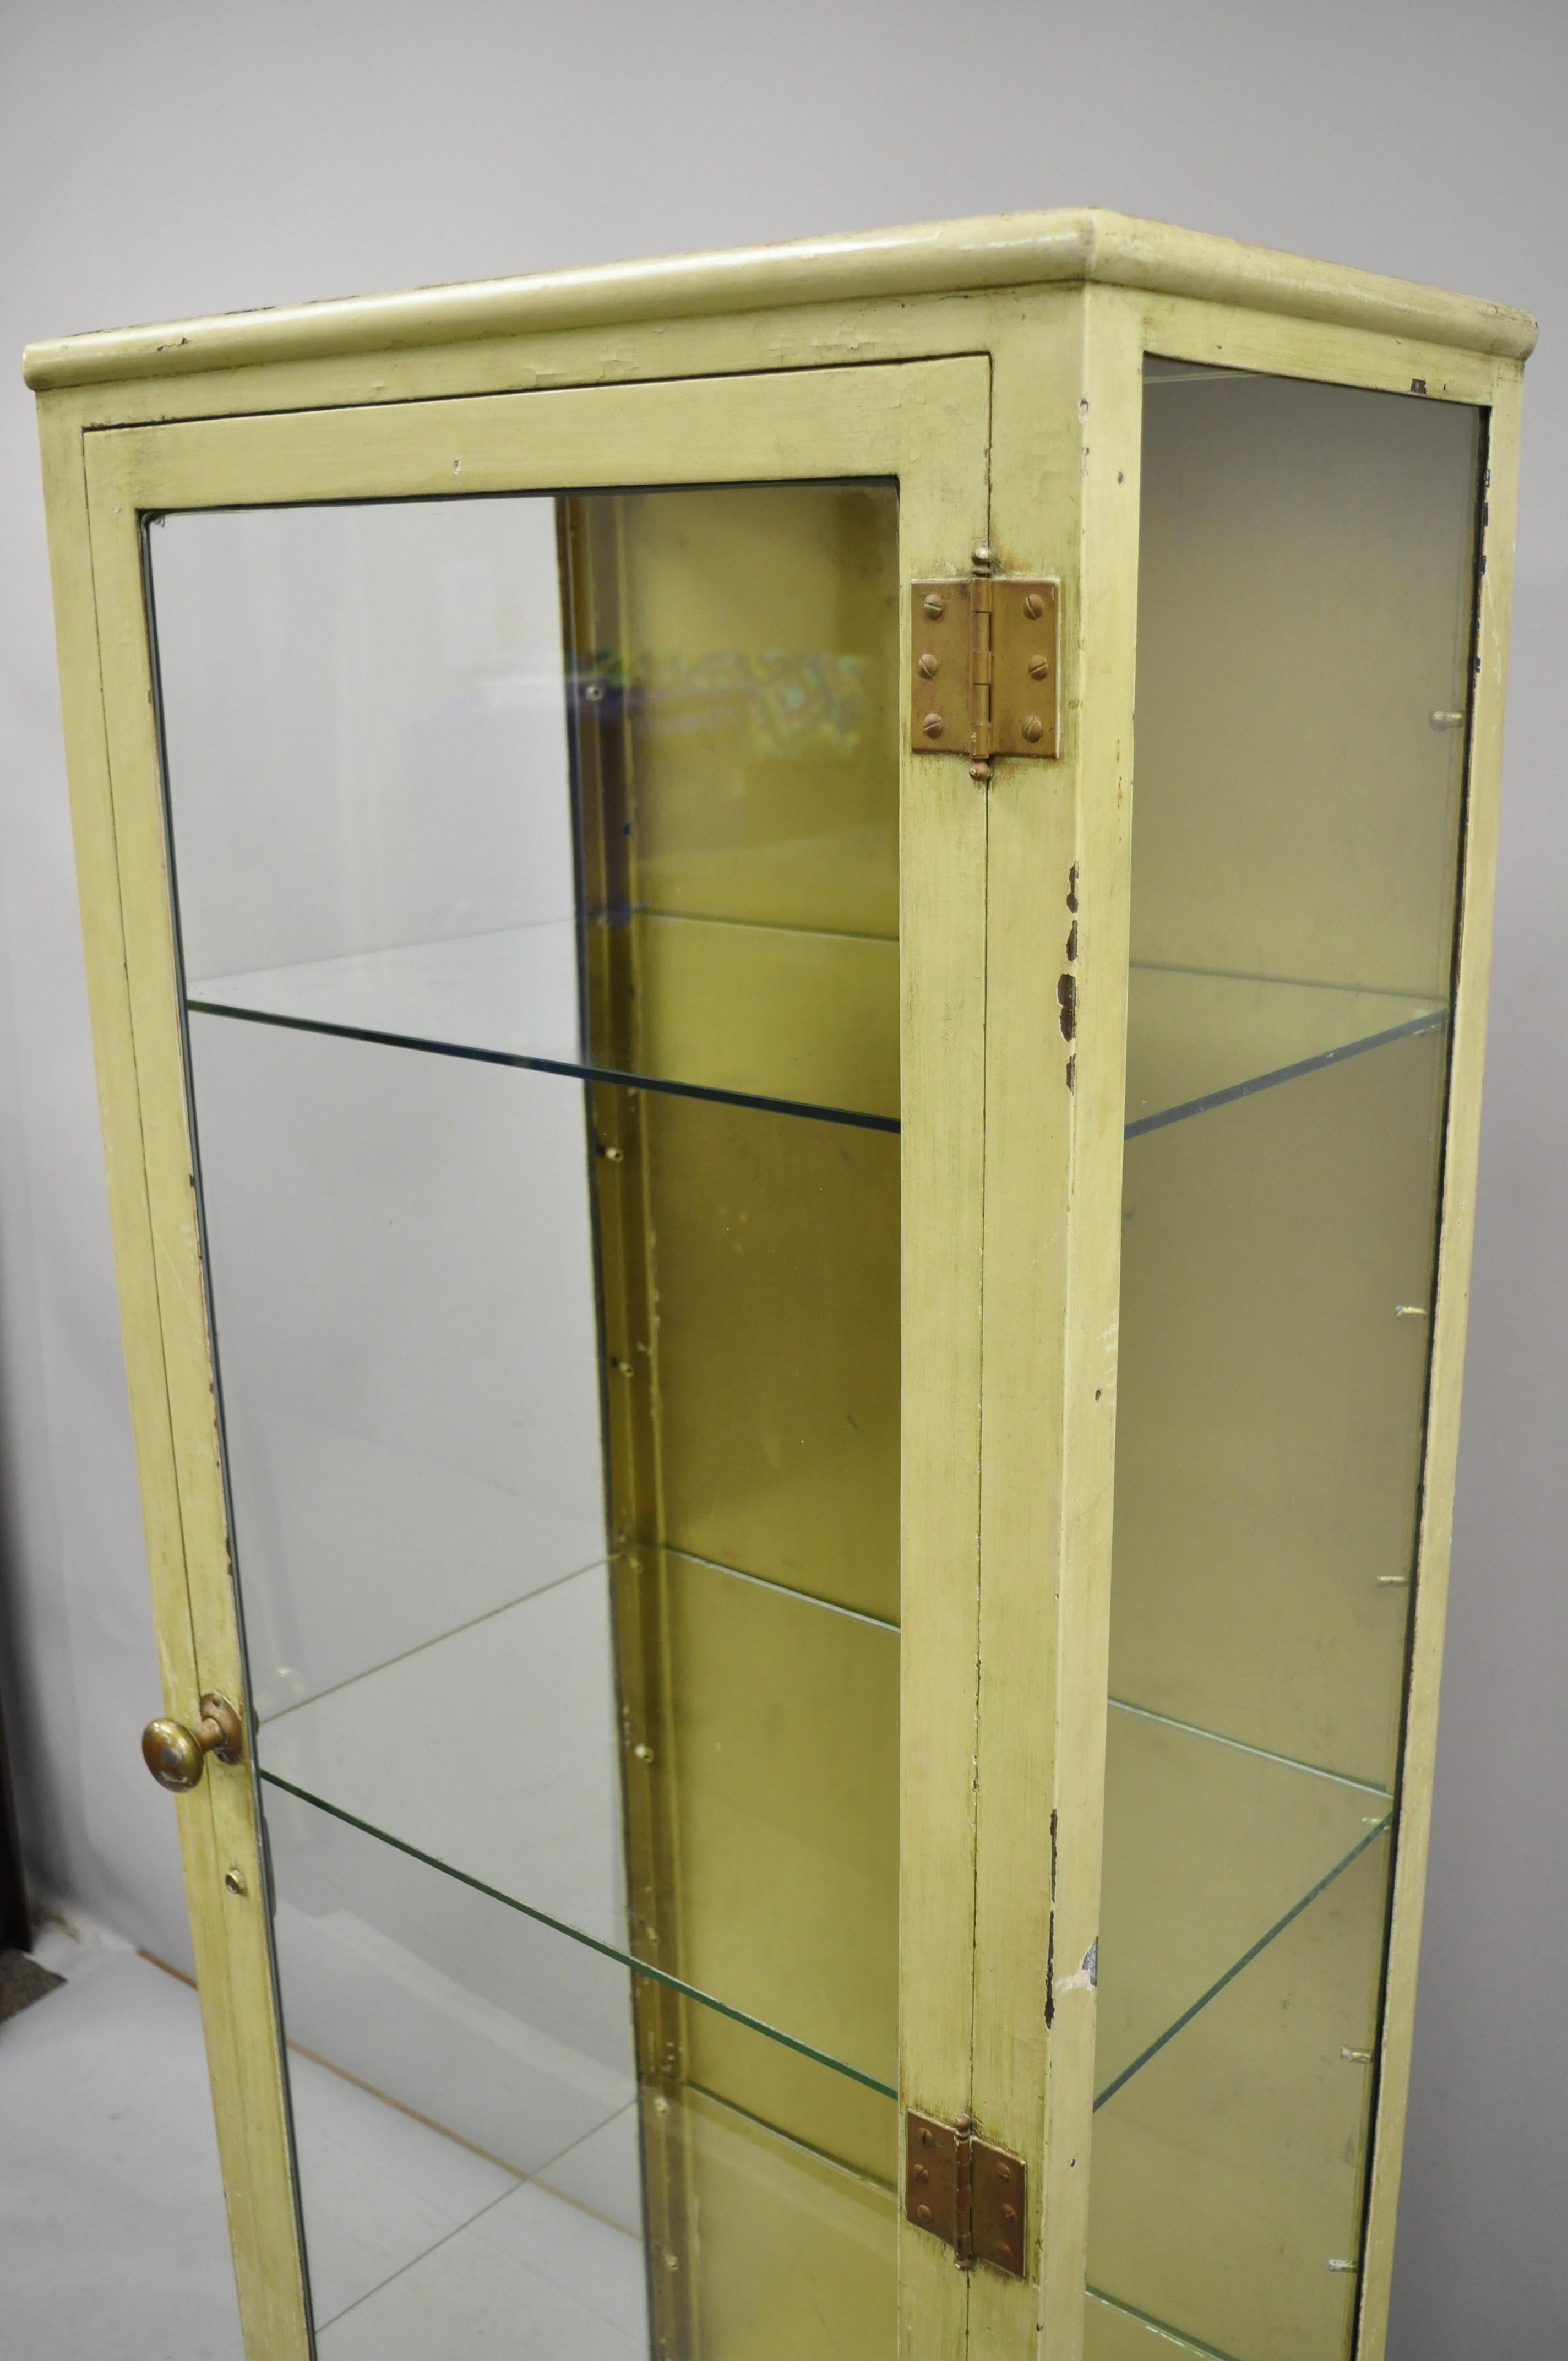 North American Antique Industrial Metal and Glass Medical Storage Dental Tall Bathroom Cabinet